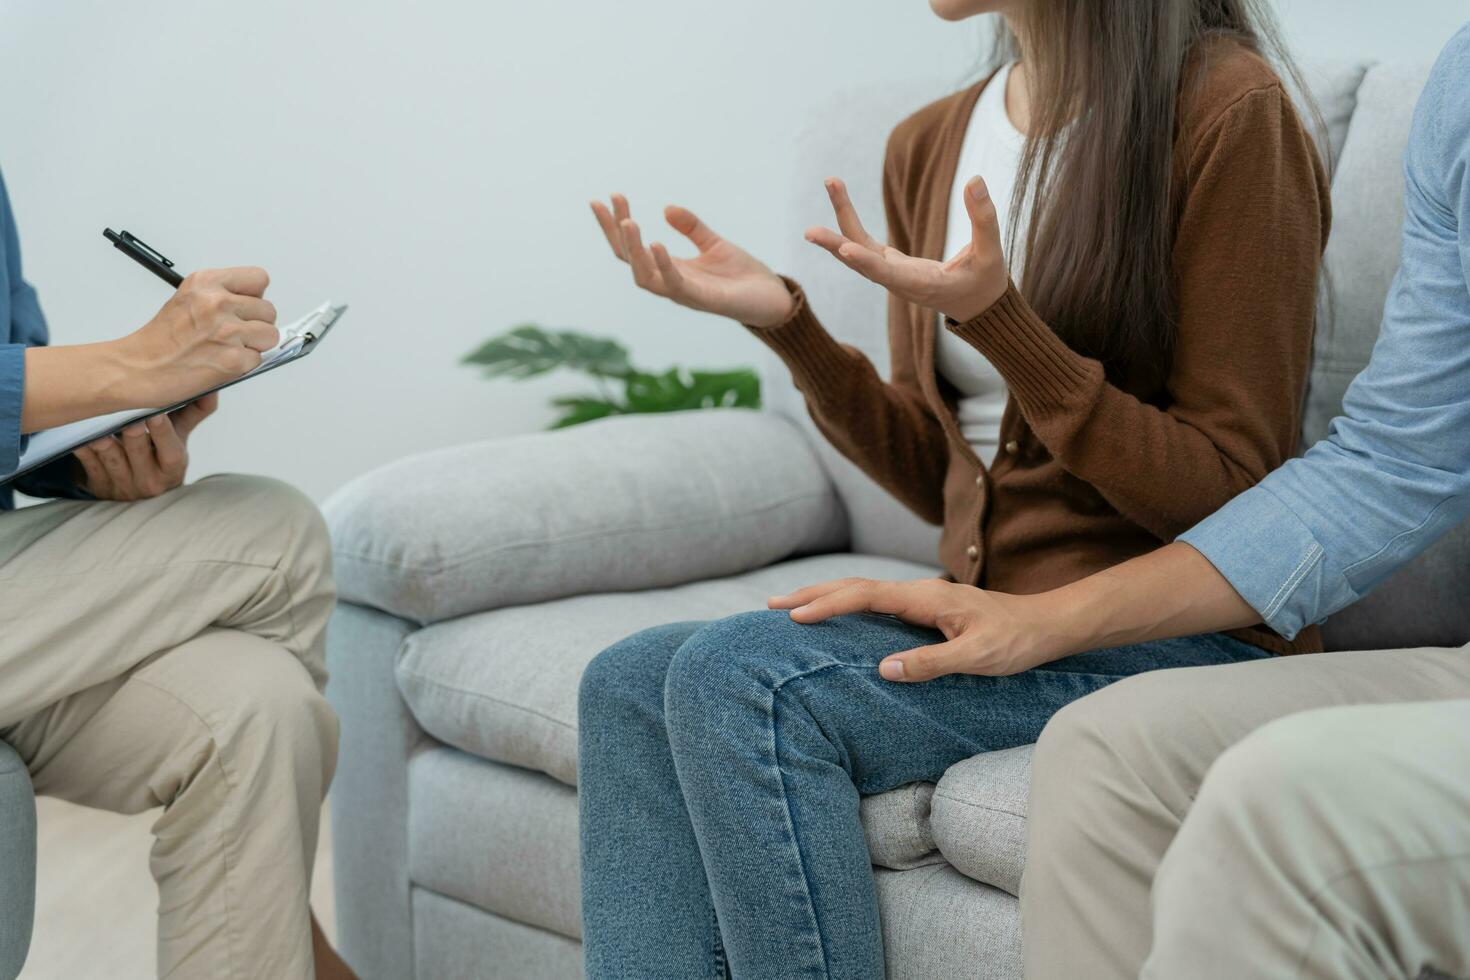 Couple support each while discussing family issues with psychiatrist. Husband encourages and empathy wife suffers depression. psychological, save divorce, Hand in hand together, trust, care, mental photo